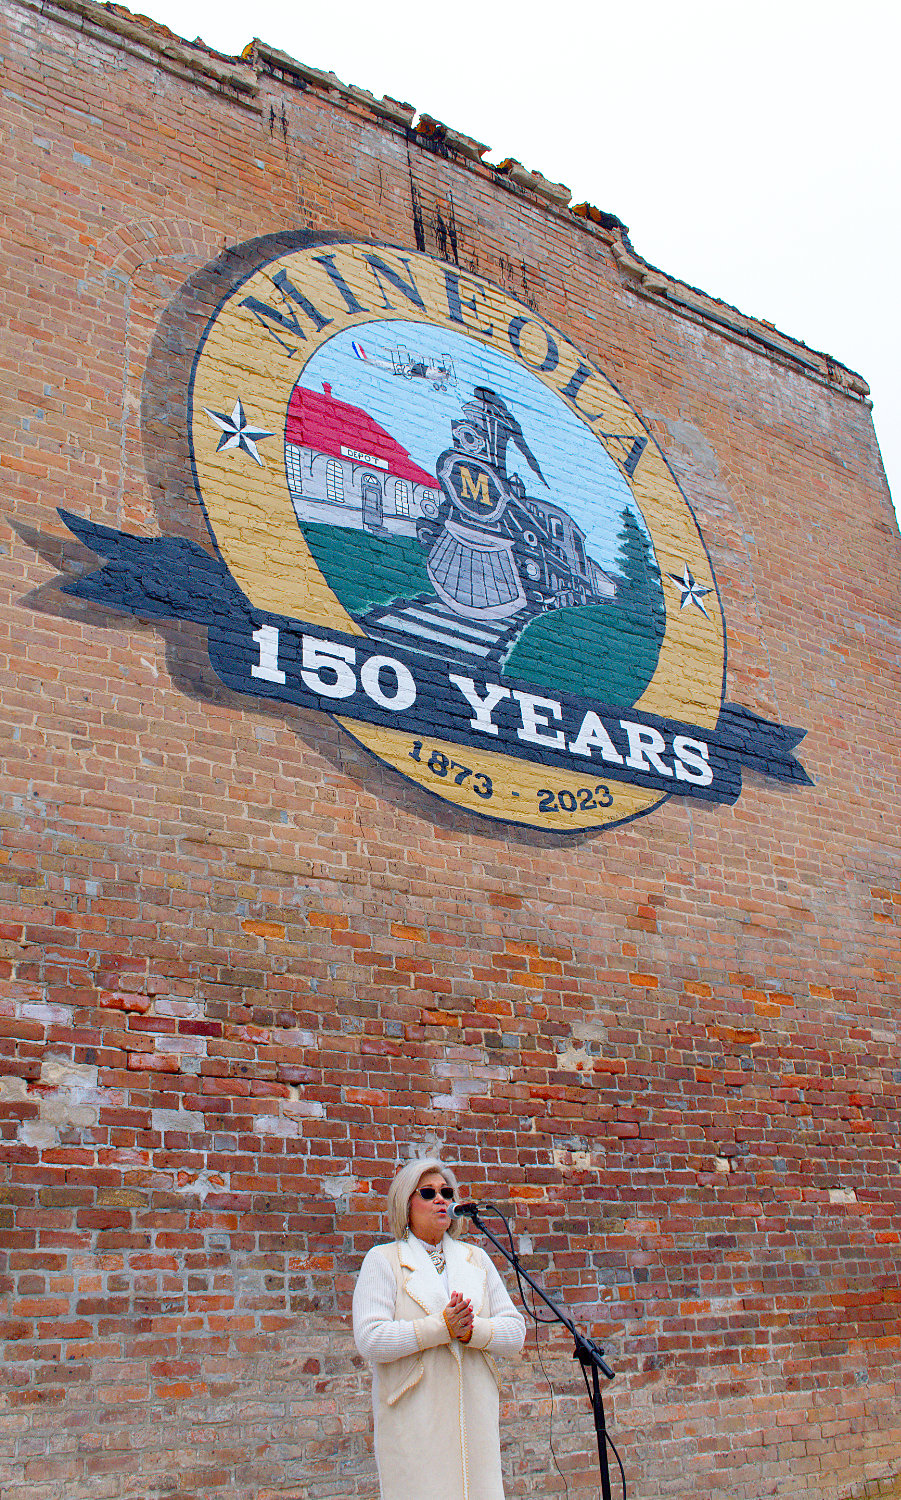 Mineola City Manager Mercy Rushing addresses the dedication Friday of the city’s sesquicentennial mural adorning the south wall of the Rushing building on S. Johnson St. Mayor Jayne Lankford read a proclamation concerning the city’ yearlong plans to celebrate its 150th anniversary in May. Erica Fry painted the mural of the official logo. Numerous events are planned throughout the year, as well as additional activities during the city’s regular events.